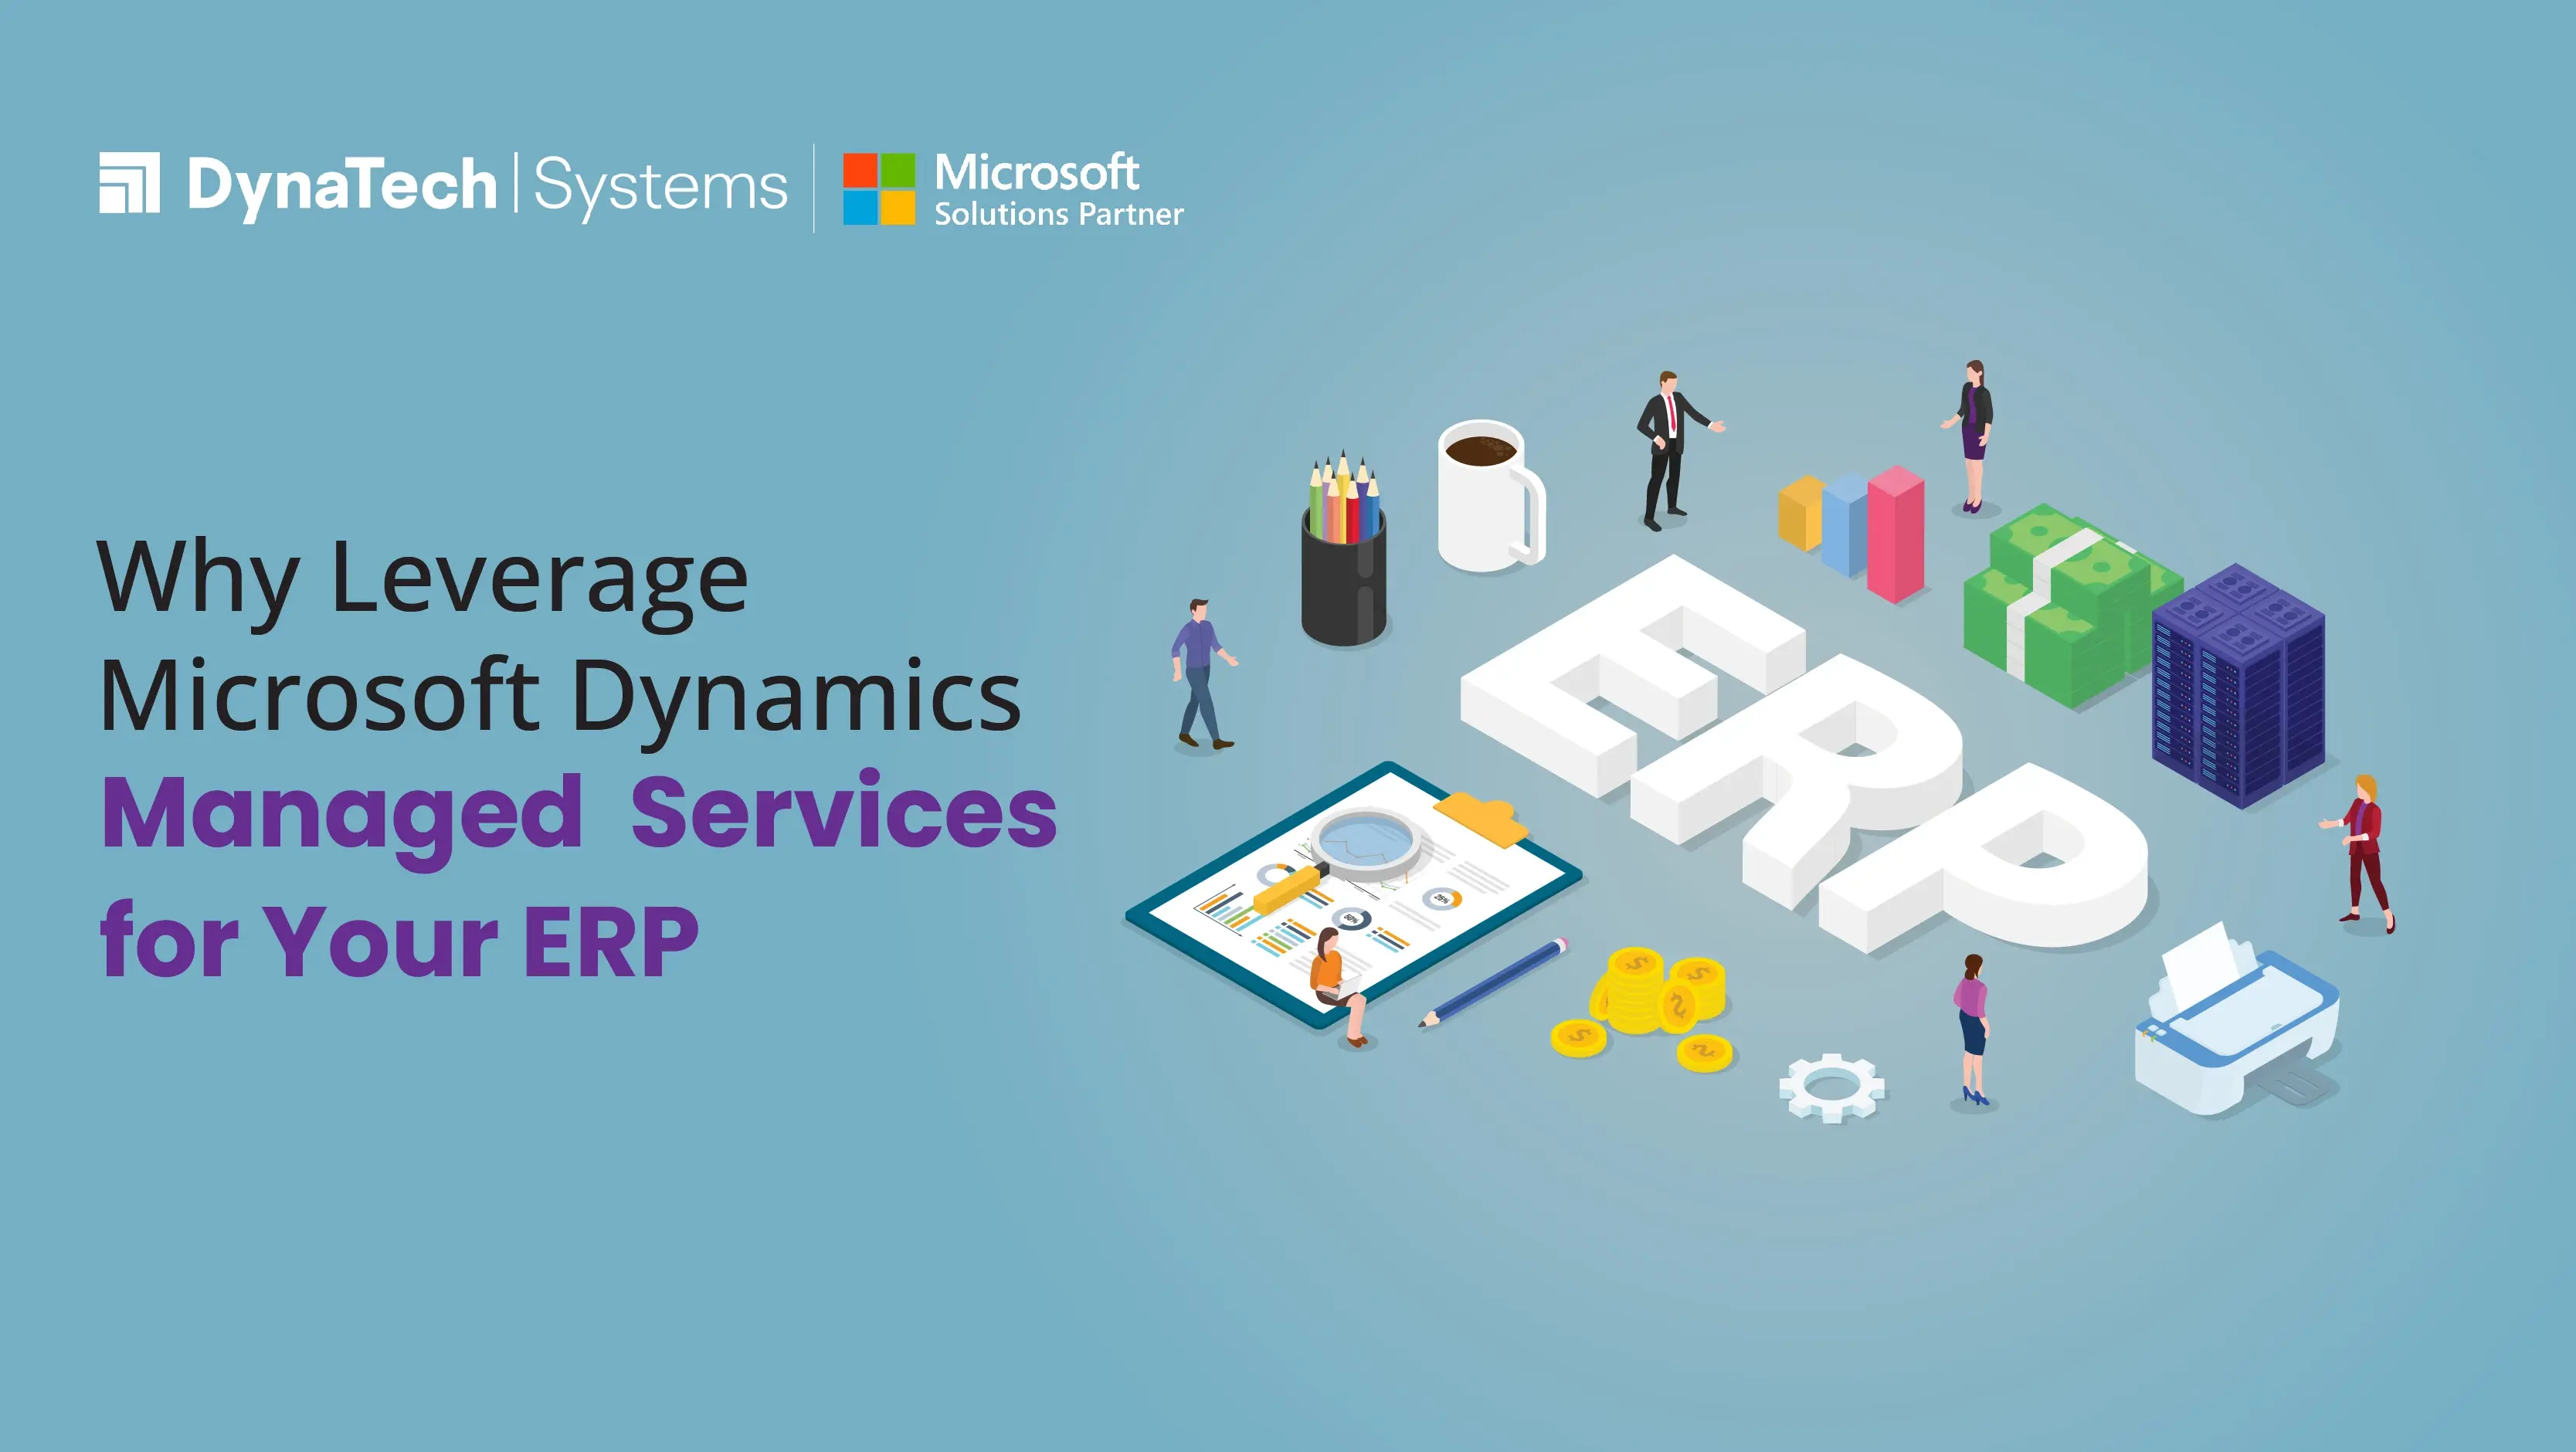 Why Leverage Microsoft Dynamics Managed Services for Your ERP